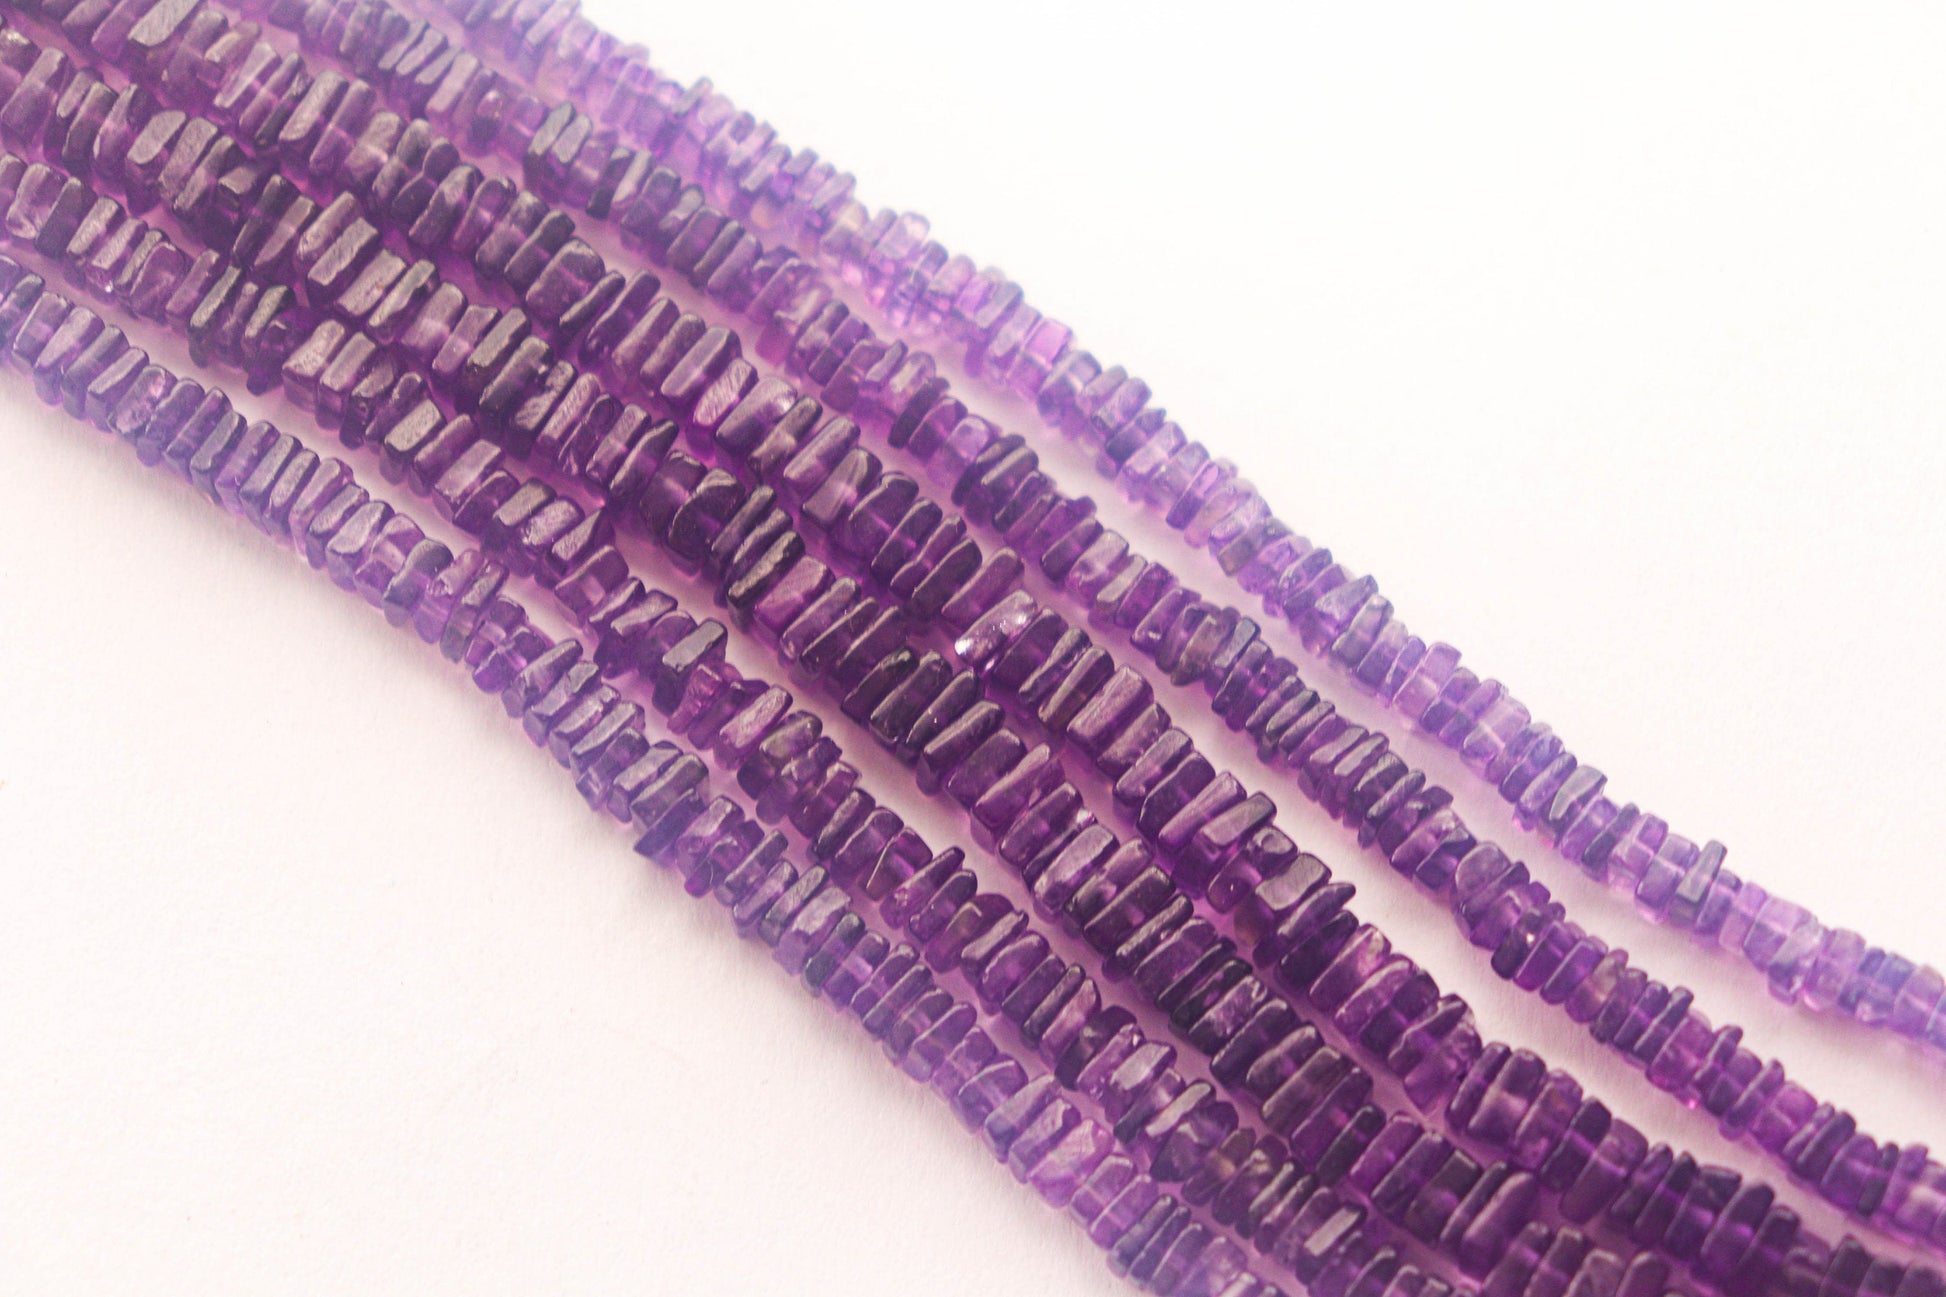 Amethyst Beads Smooth Square Heishi Shape | 4x4mm | 16 Inch Full String | Natural Gemstone Beads for Jewelry making Beadsforyourjewelry